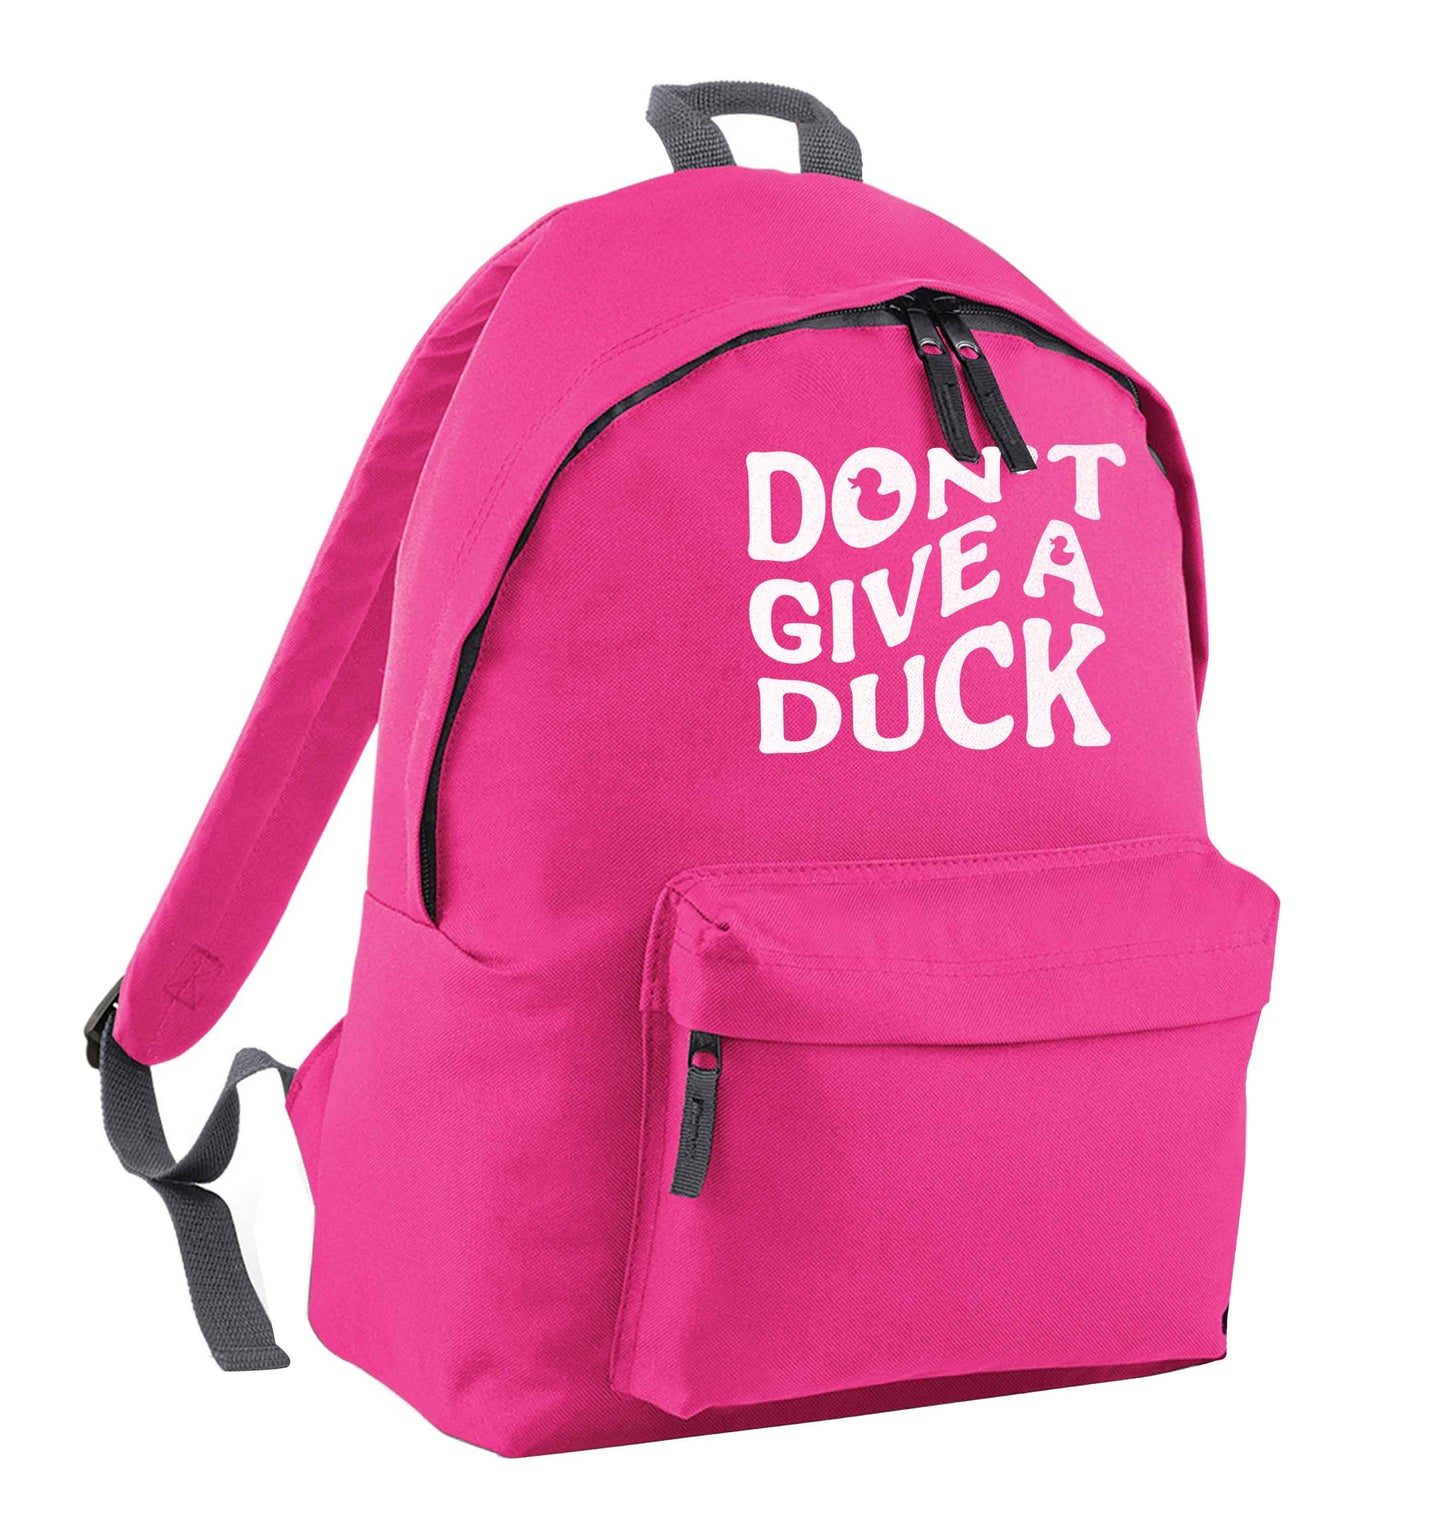 Don't give a duck pink children's backpack